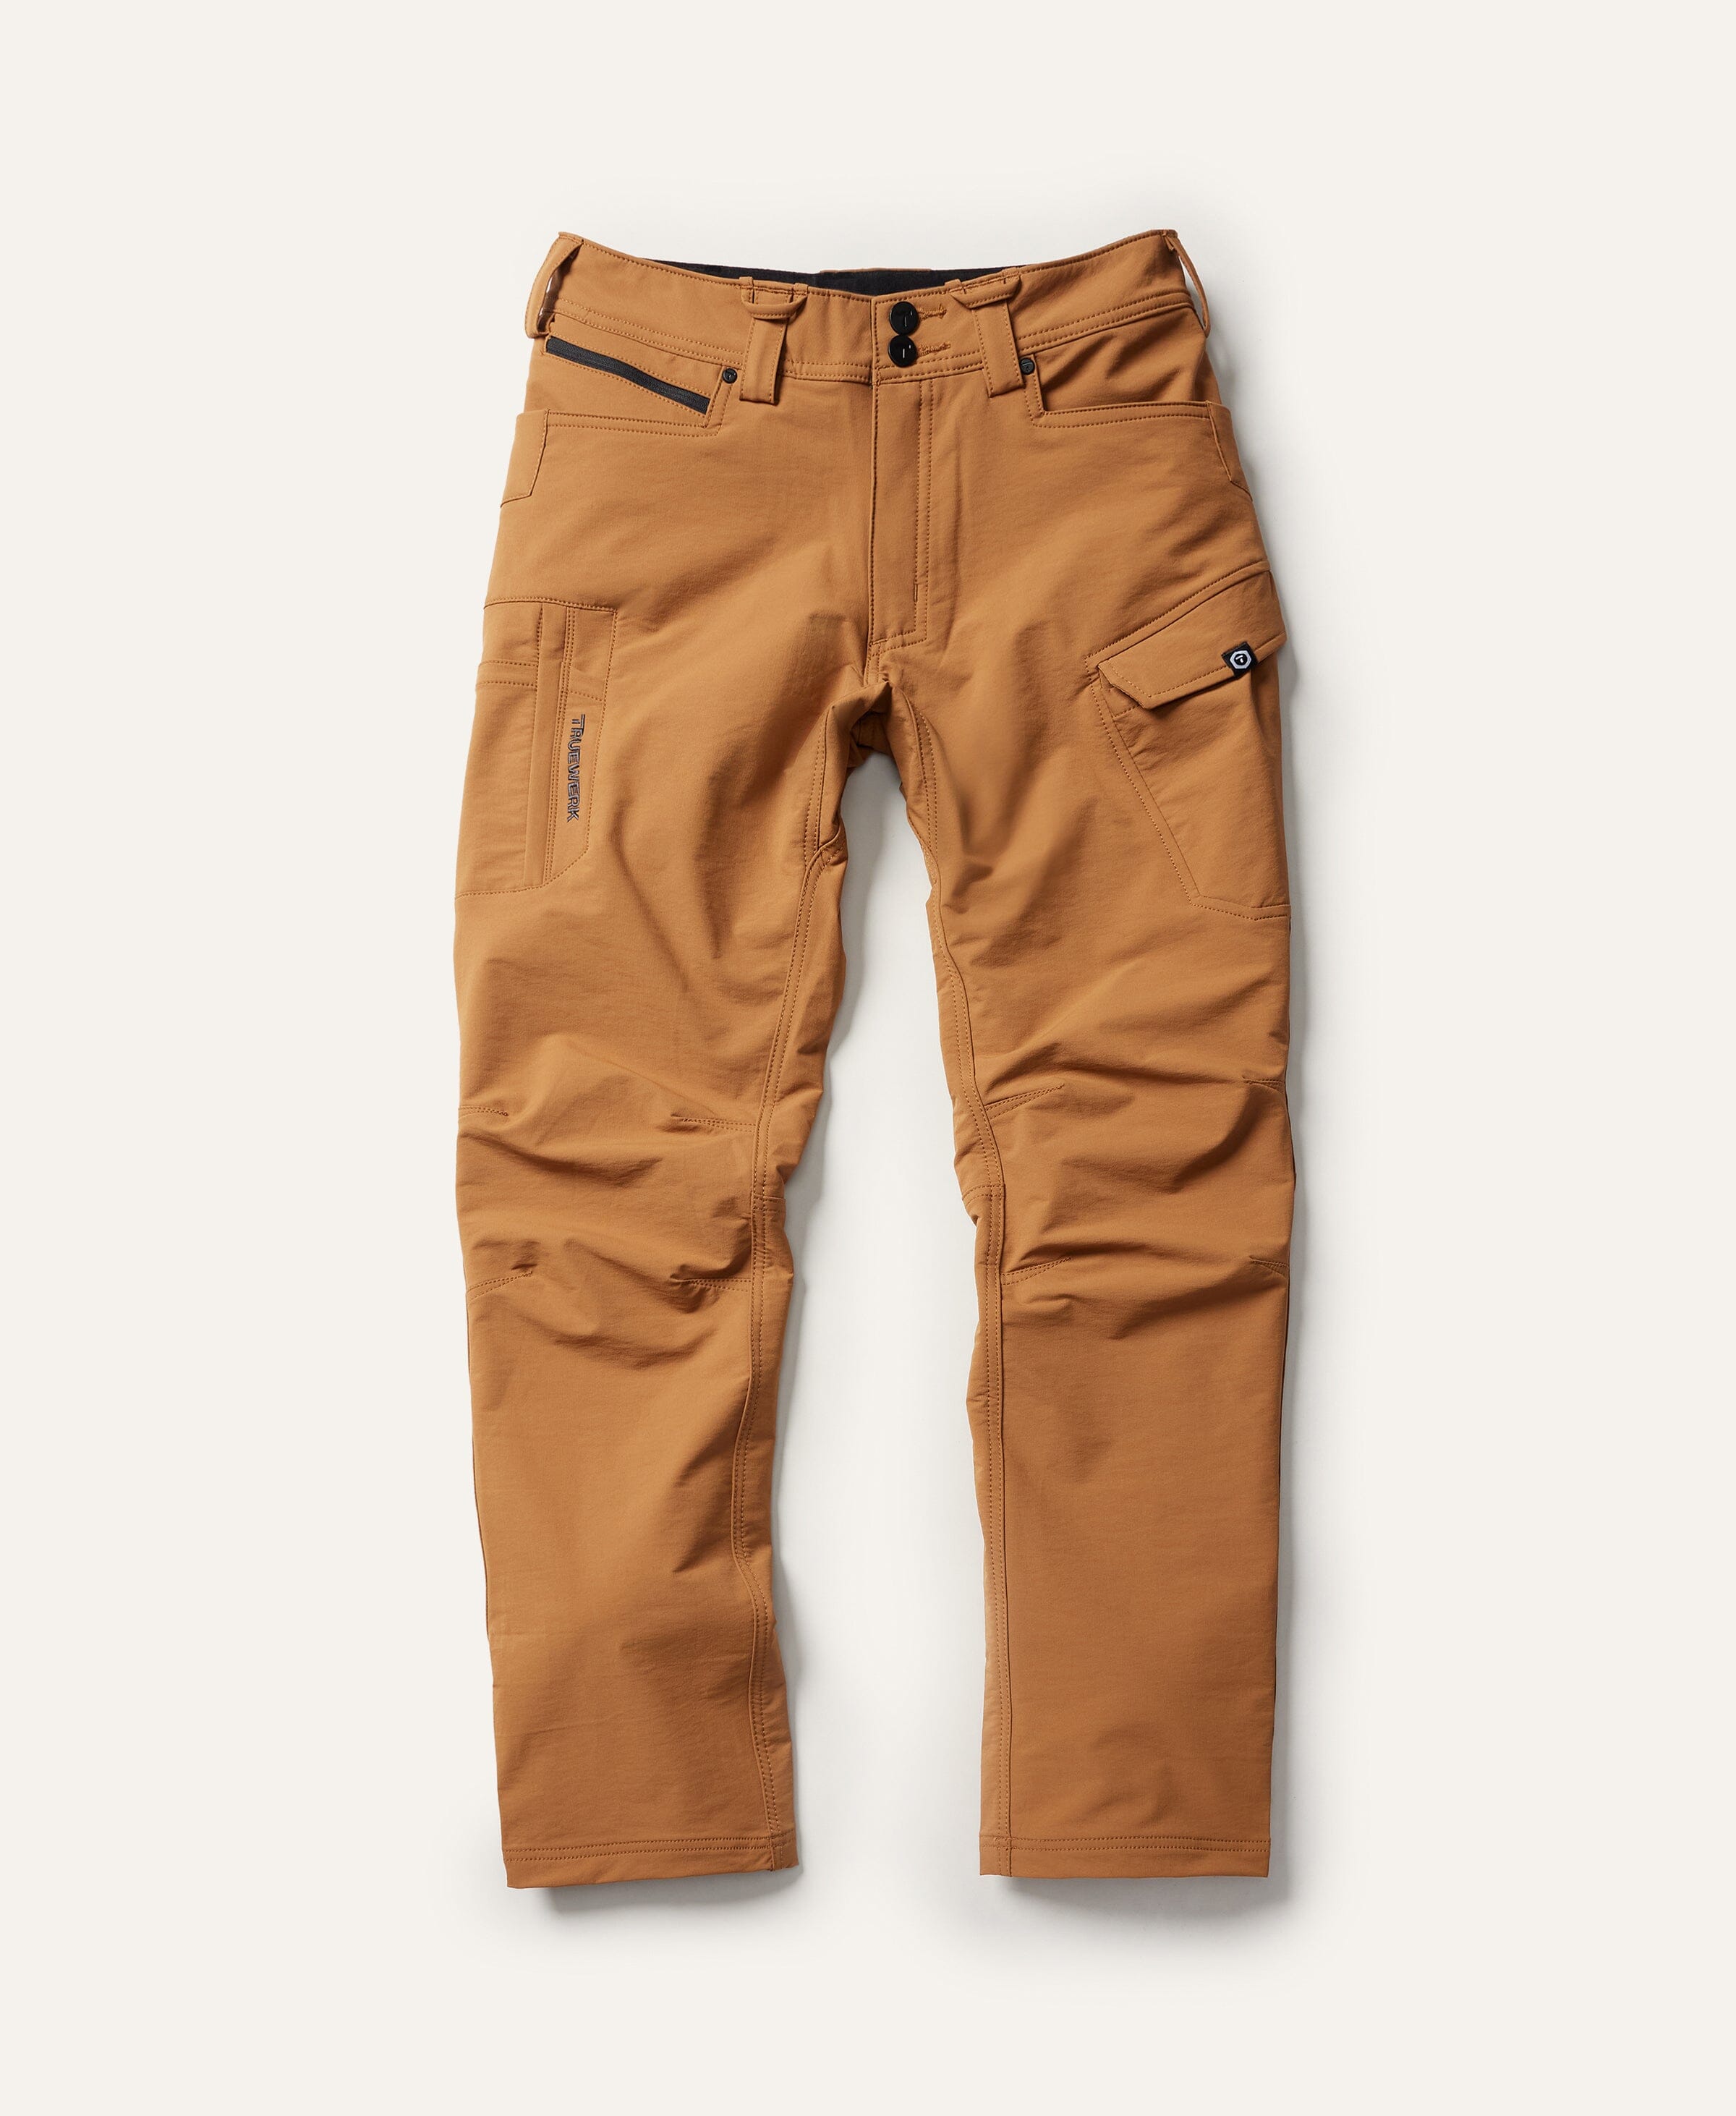 What are the Different Types of Men's Pants